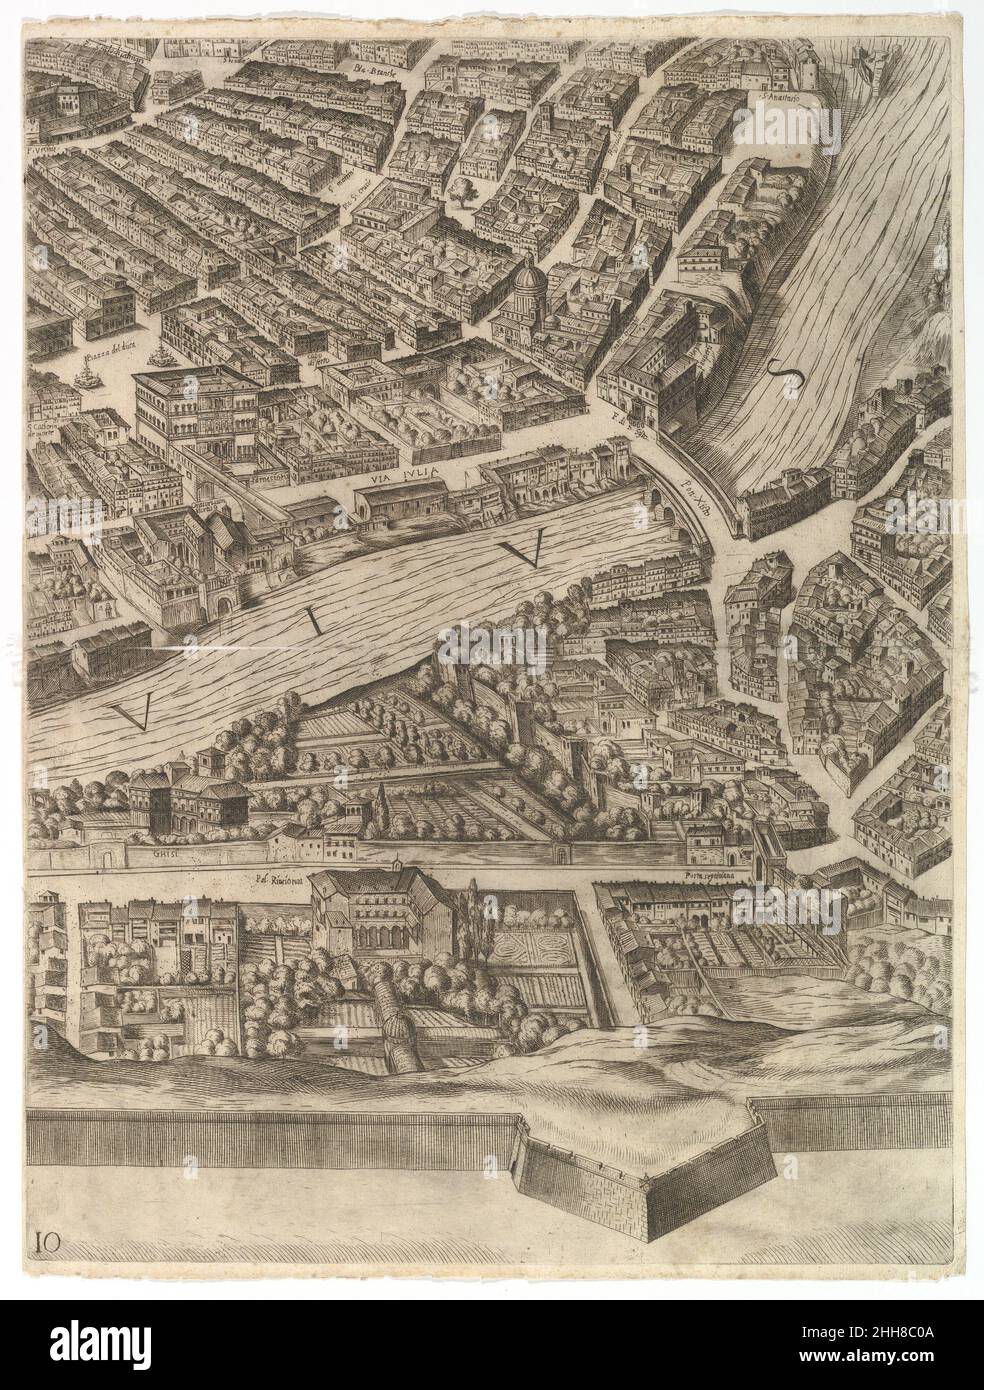 Plan of the City of Rome. Part 10 with the Tiber and the Villa Farnesina 1645 Antonio Tempesta Italian Part of the lower half of the map of Rome. Depicted is a central part of the city with a view of both the left and right bank. On the left bank the Villa Farnesina can be identified.. Plan of the City of Rome. Part 10 with the Tiber and the Villa Farnesina  414812 Stock Photo